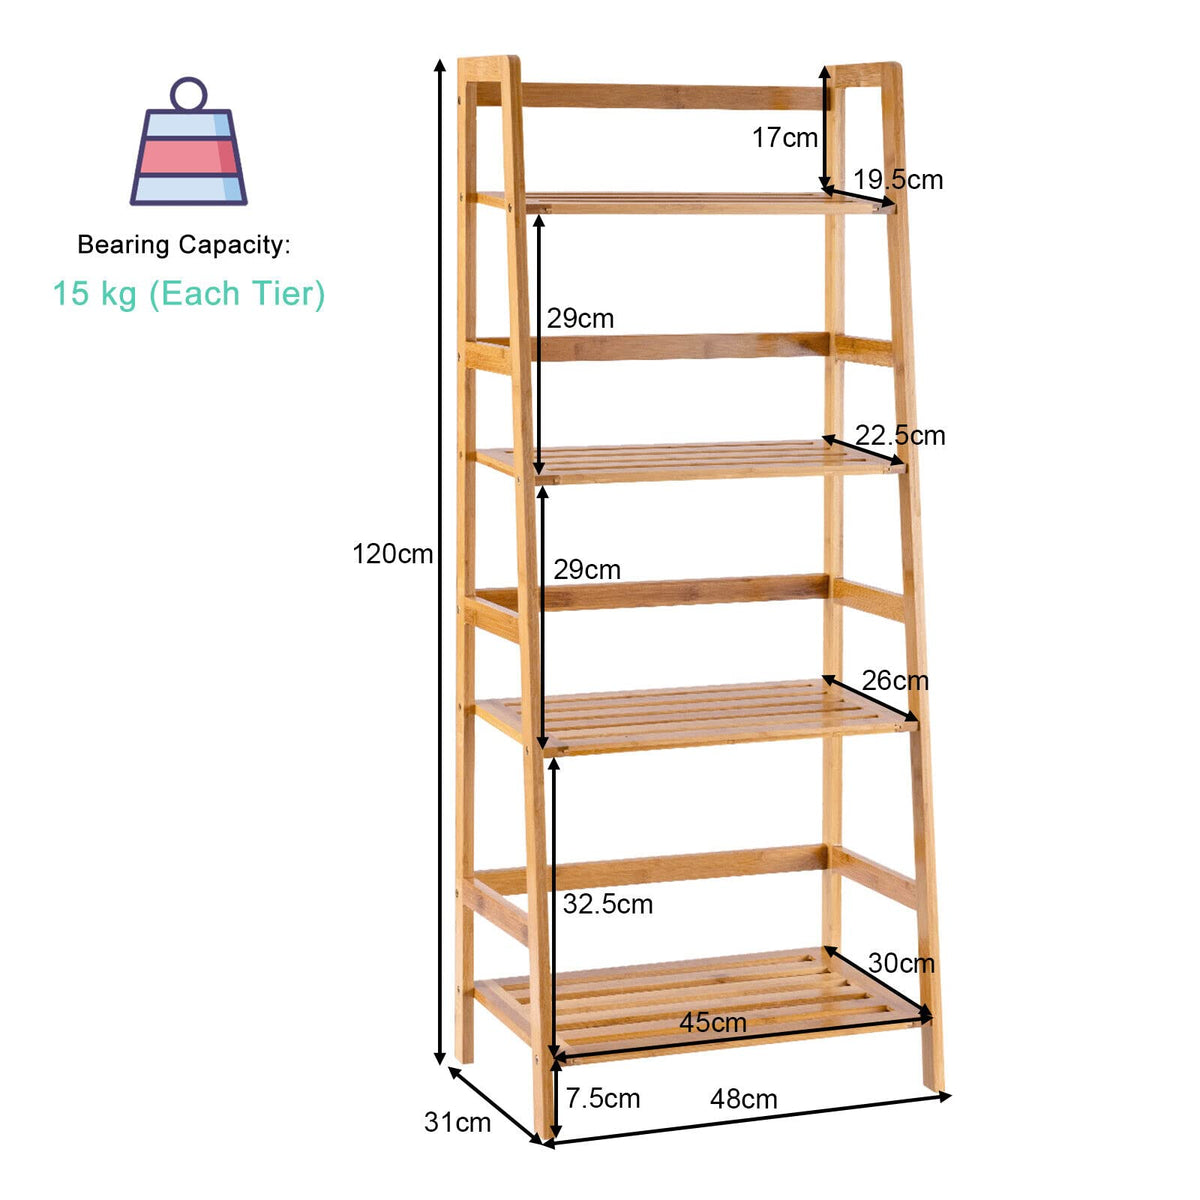 Giantex 4-Tier Bamboo Plant Shelf, Multipurpose Flower Ladder Stand, Potted Plant Display Rack